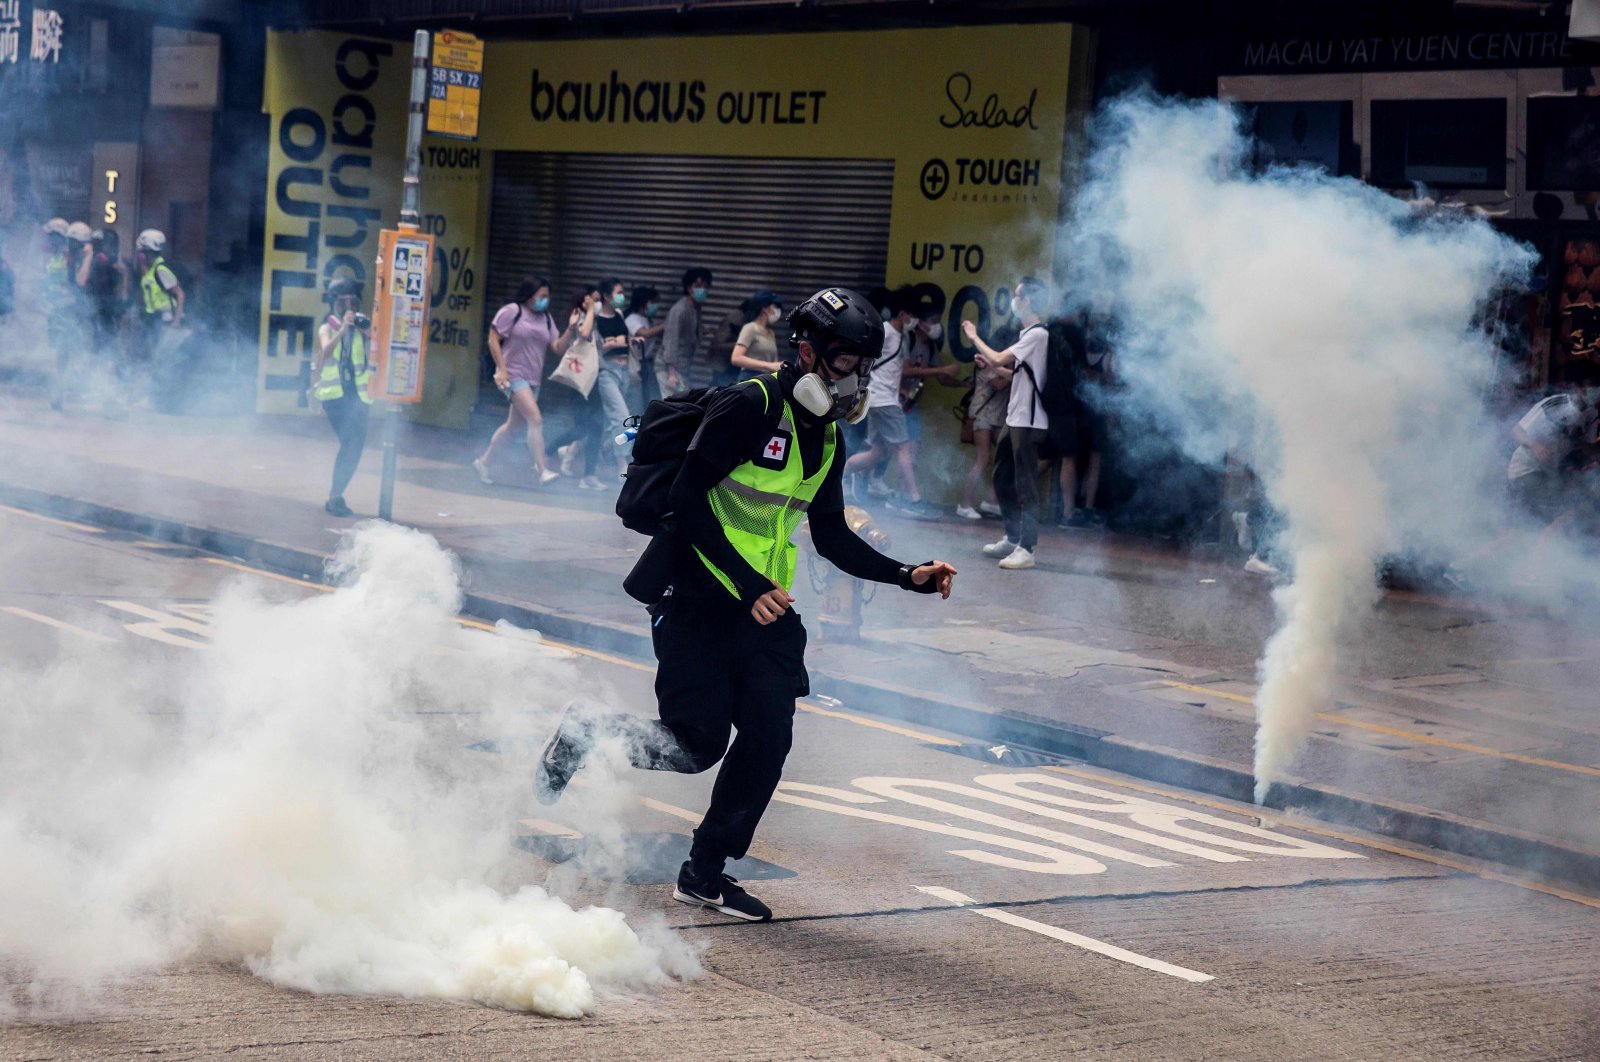  Police fire tear gas on protesters during planned protests against a proposal to enact a new security legislation in Hong Kong on May 24, 2020. (AFP Photo)